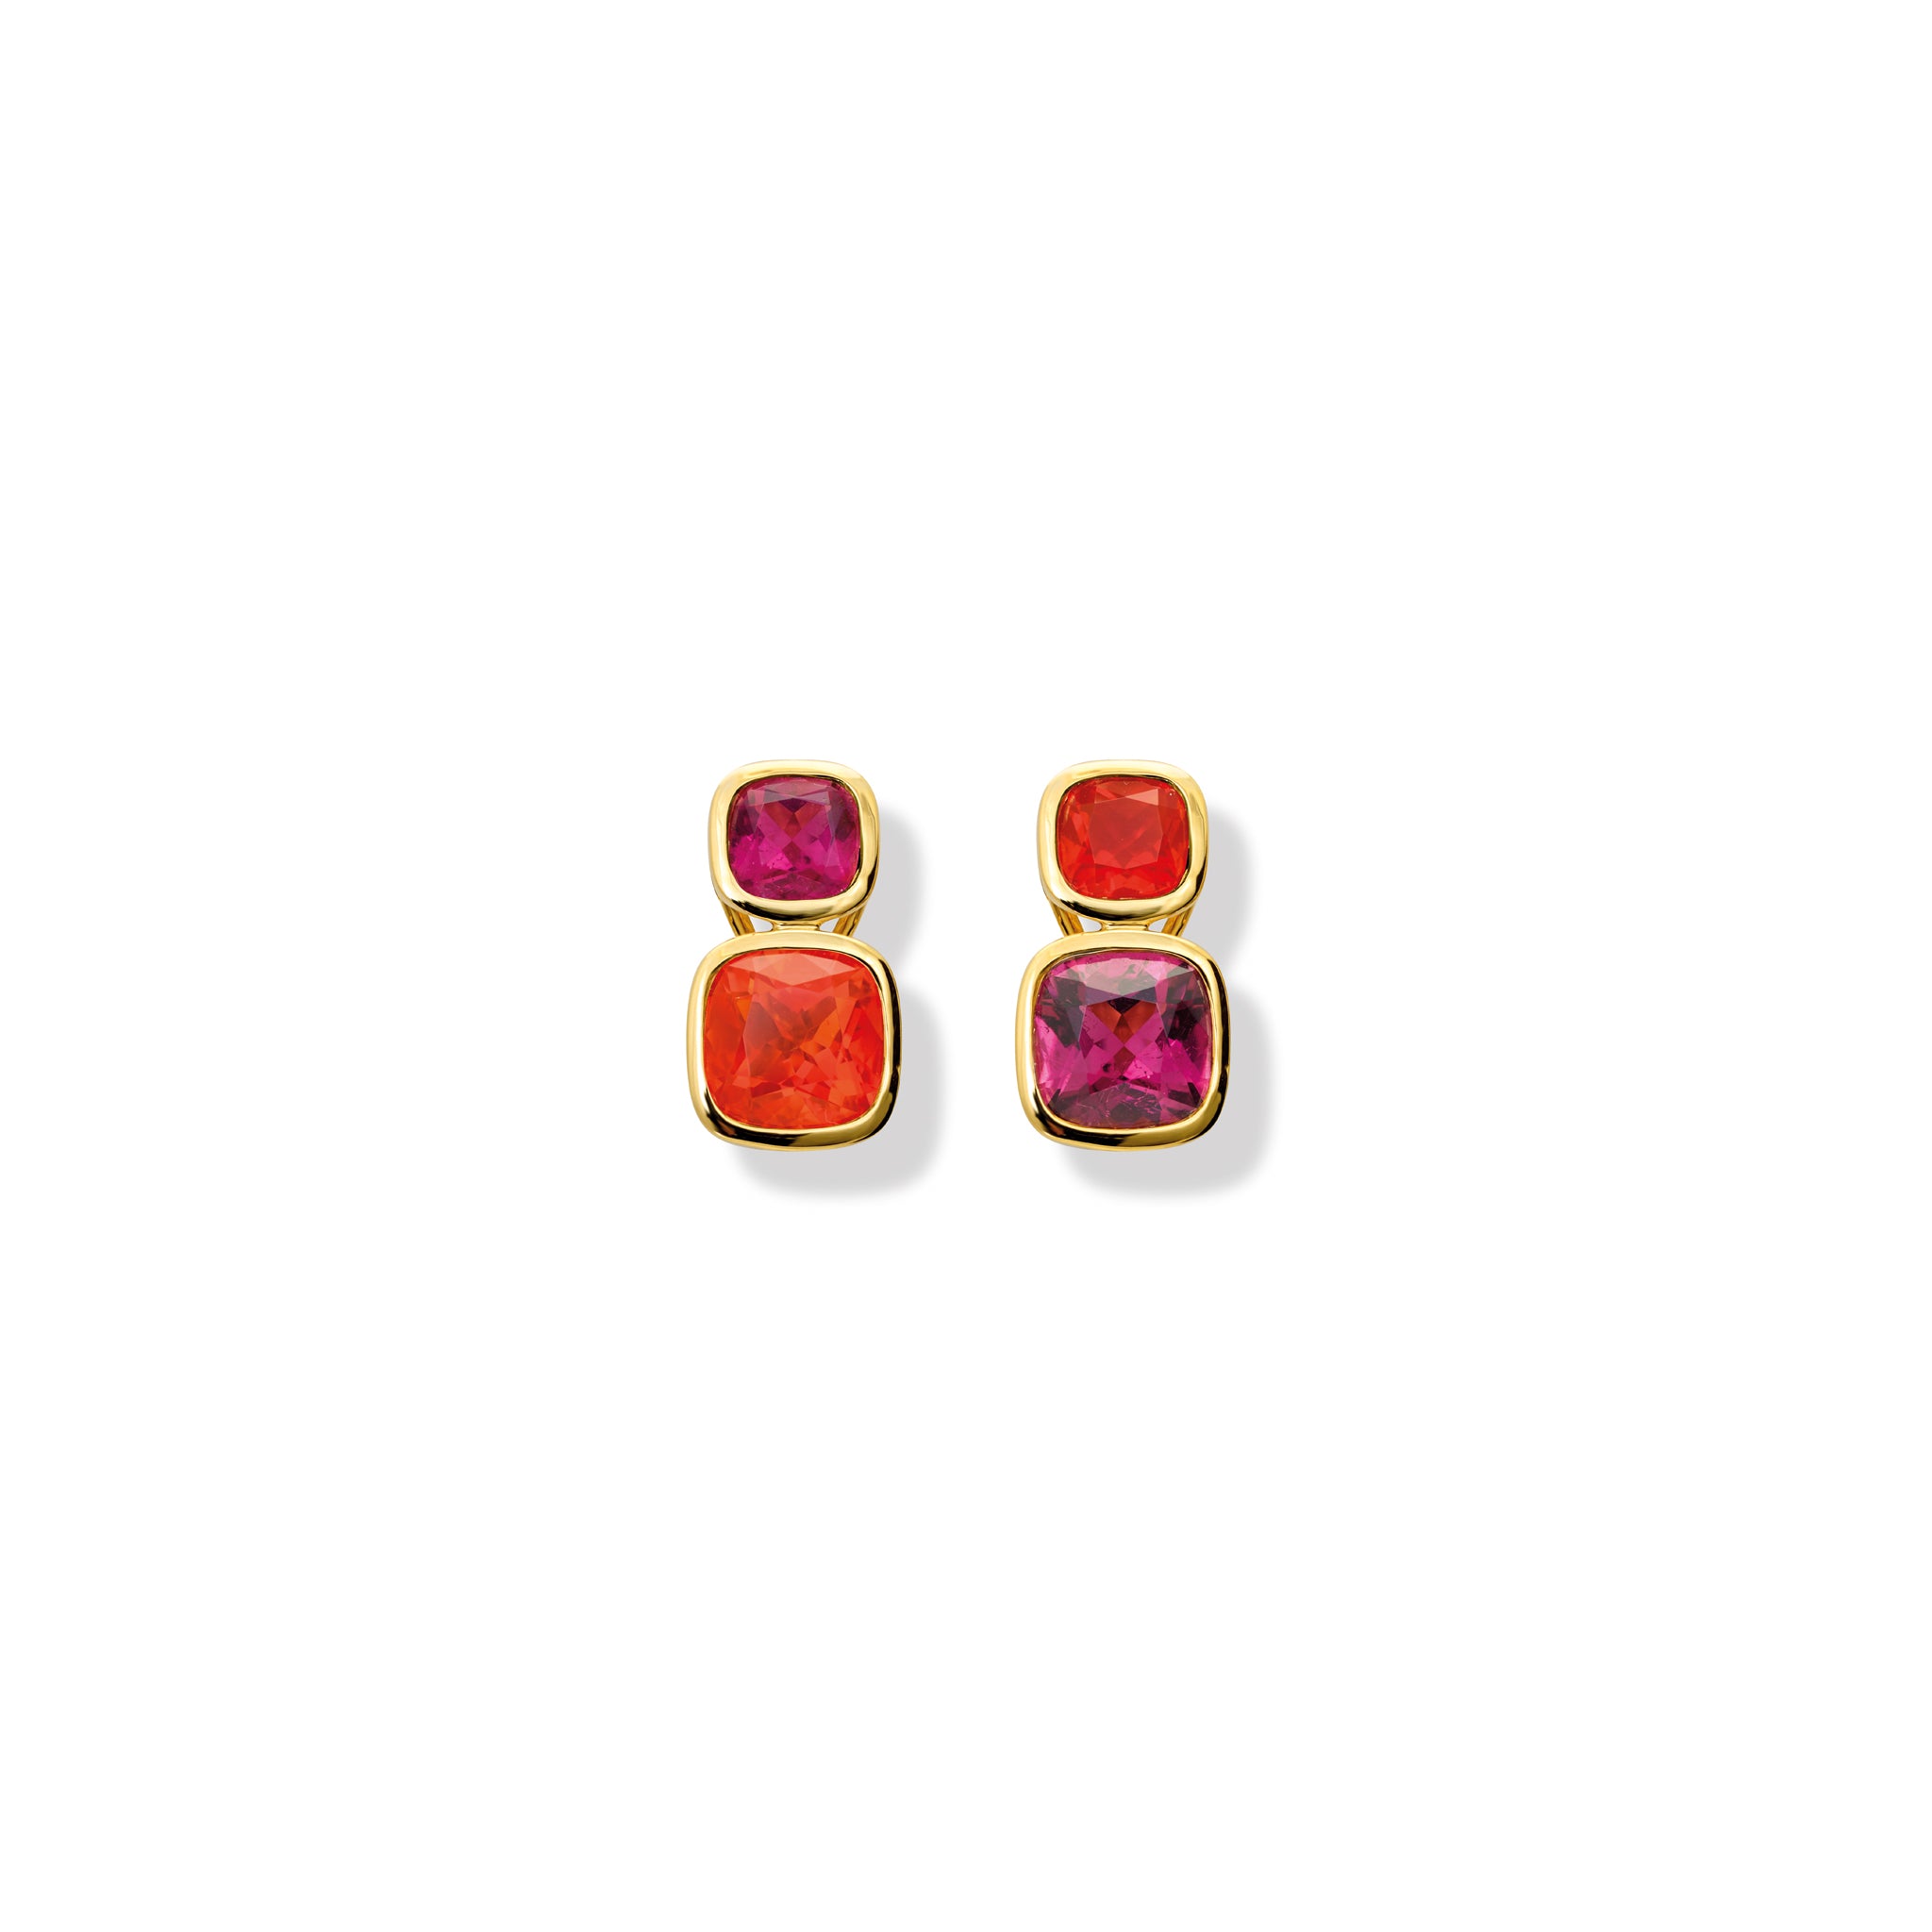 Qin & Han Earrings 18ct Yellow Gold - Inverted Fire Opal & Pink Tourmaline